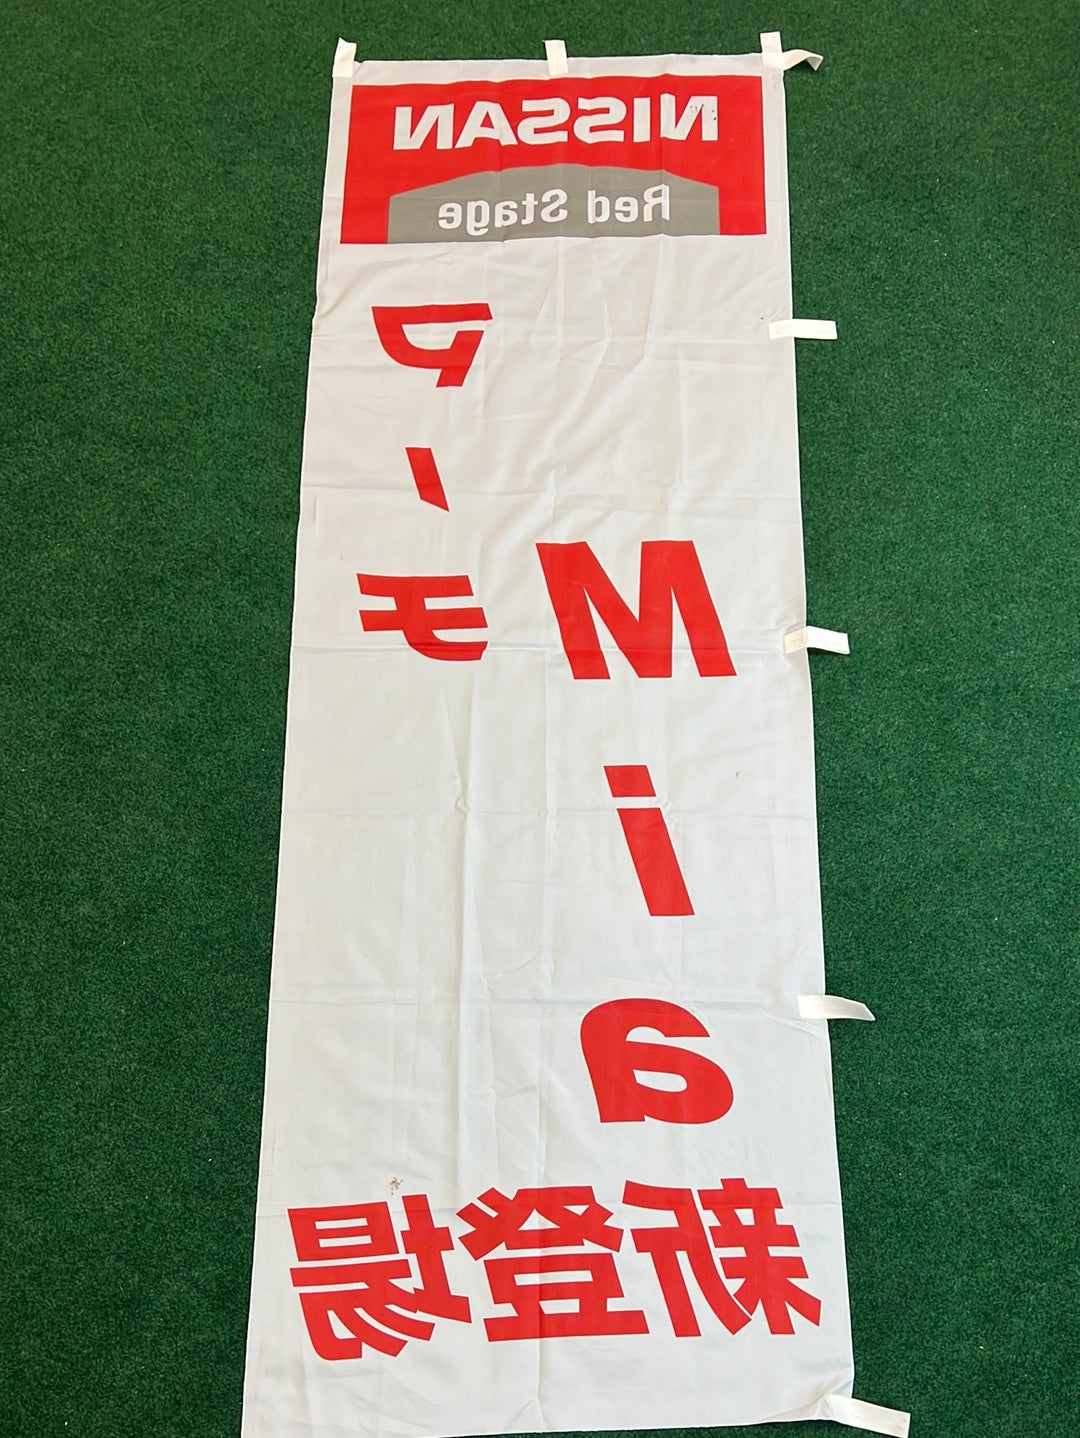 Nissan Red Stage - Mia (New Appearance) Nissan Dealer Nobori Banner